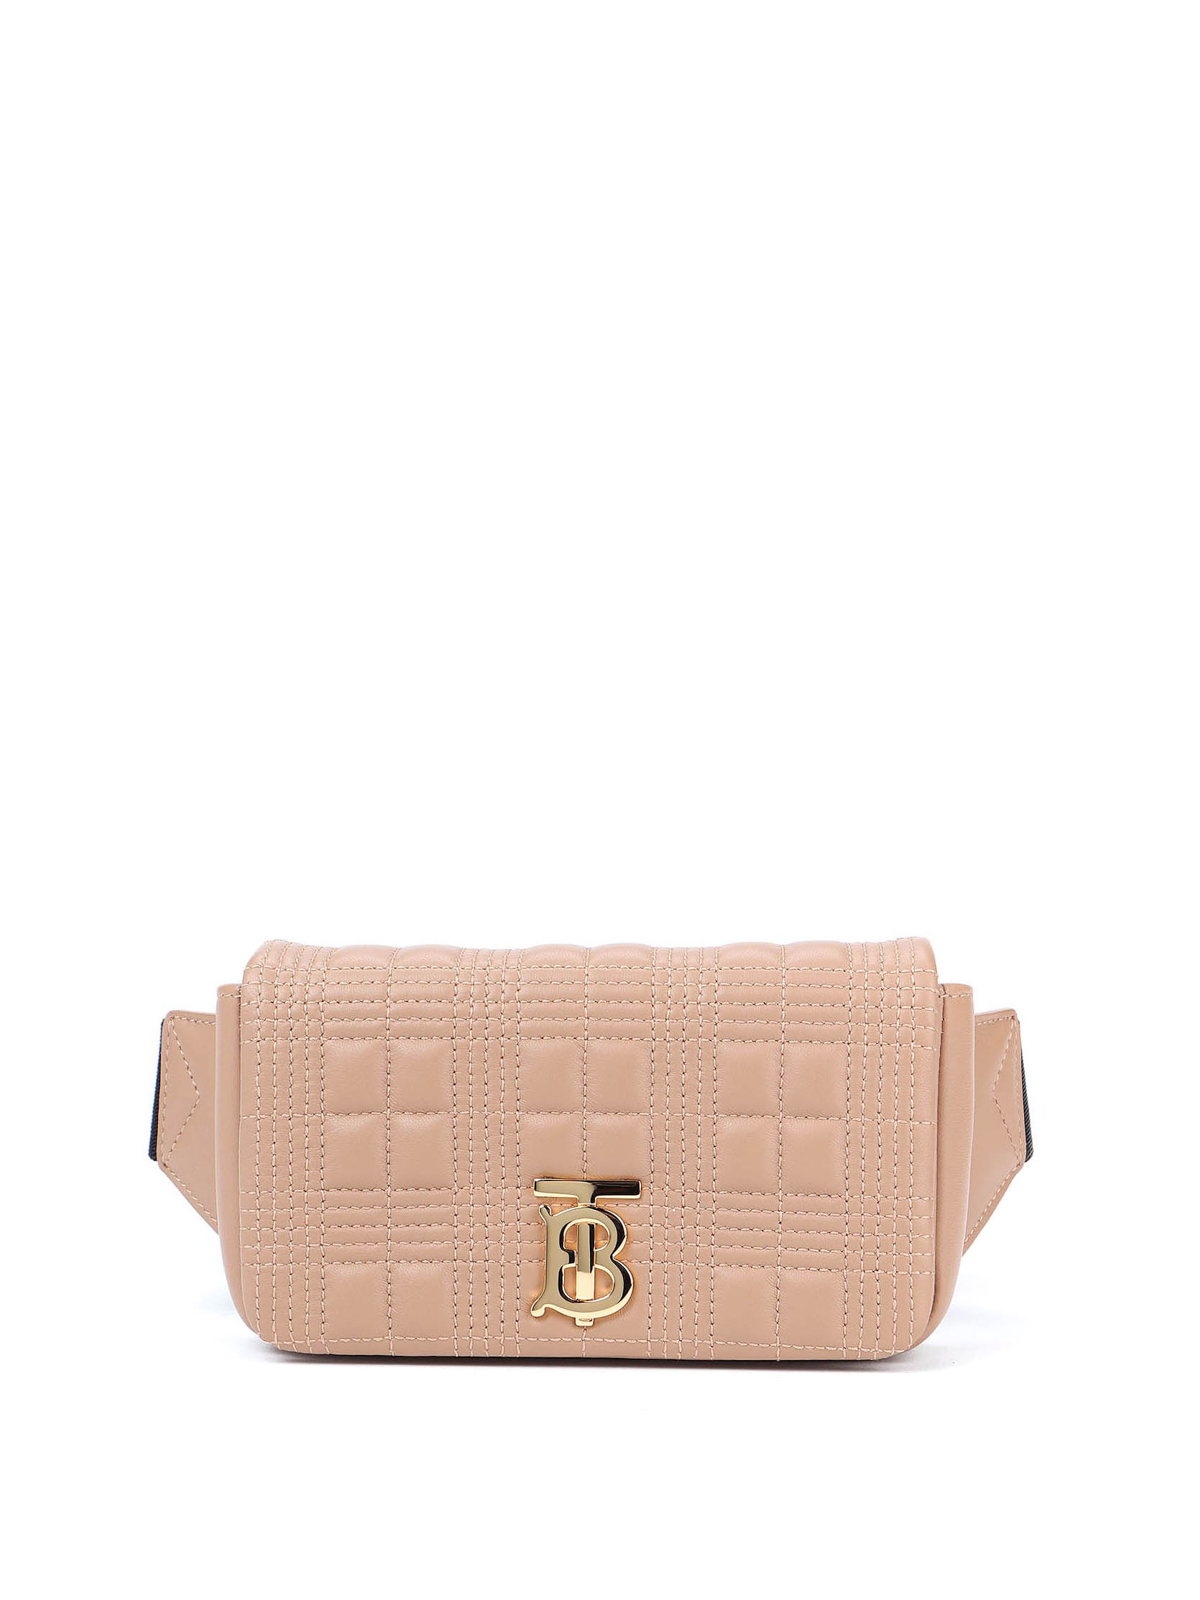 Burberry Quilted TB Leather Belt Bag